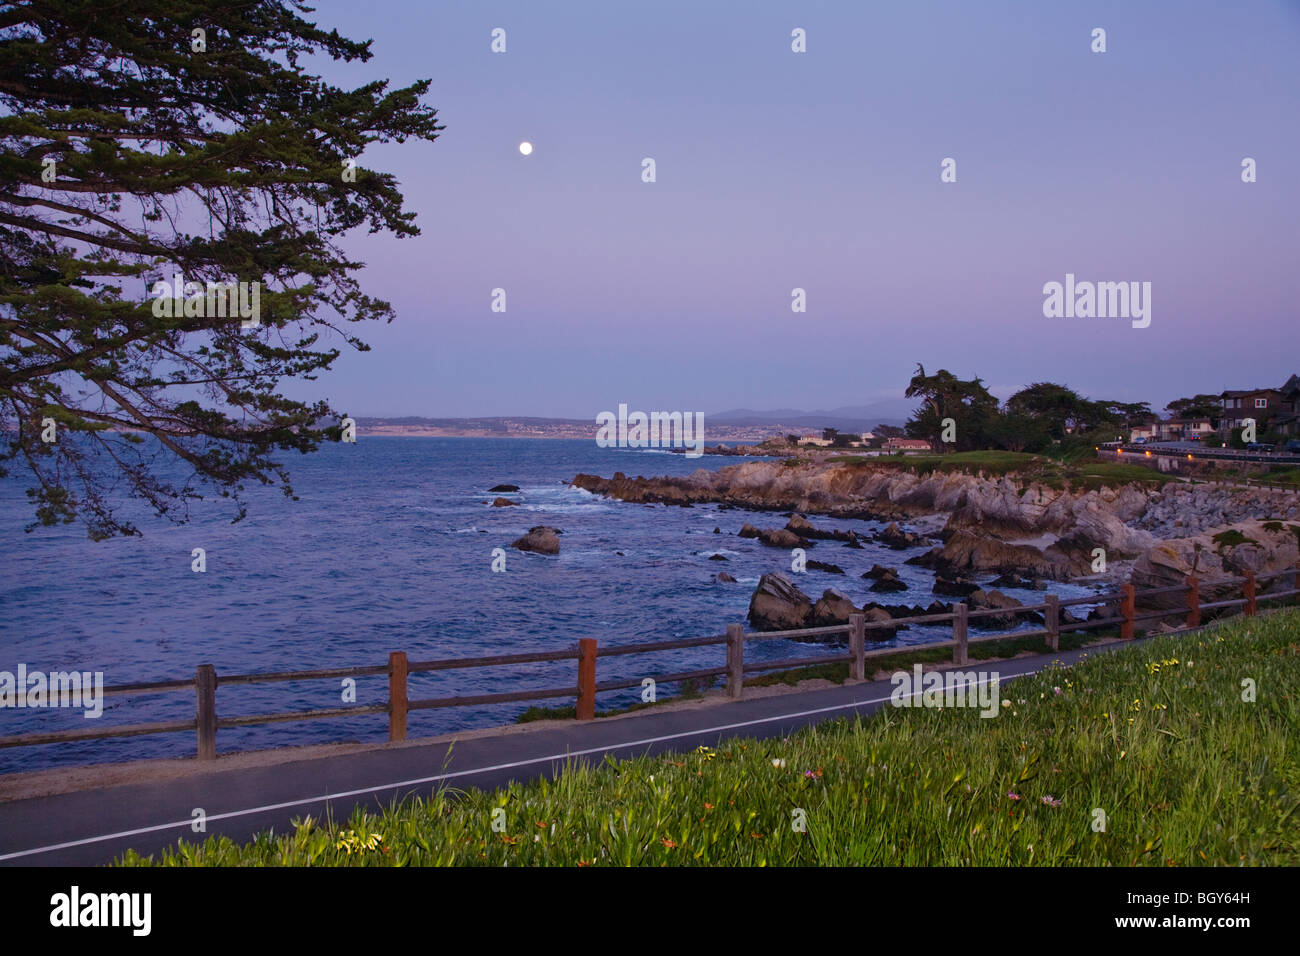 Monterey cypress tree and MOON RISE along SCENIC DRIVE - PACIFIC GROVE, CALIFORNIA Stock Photo